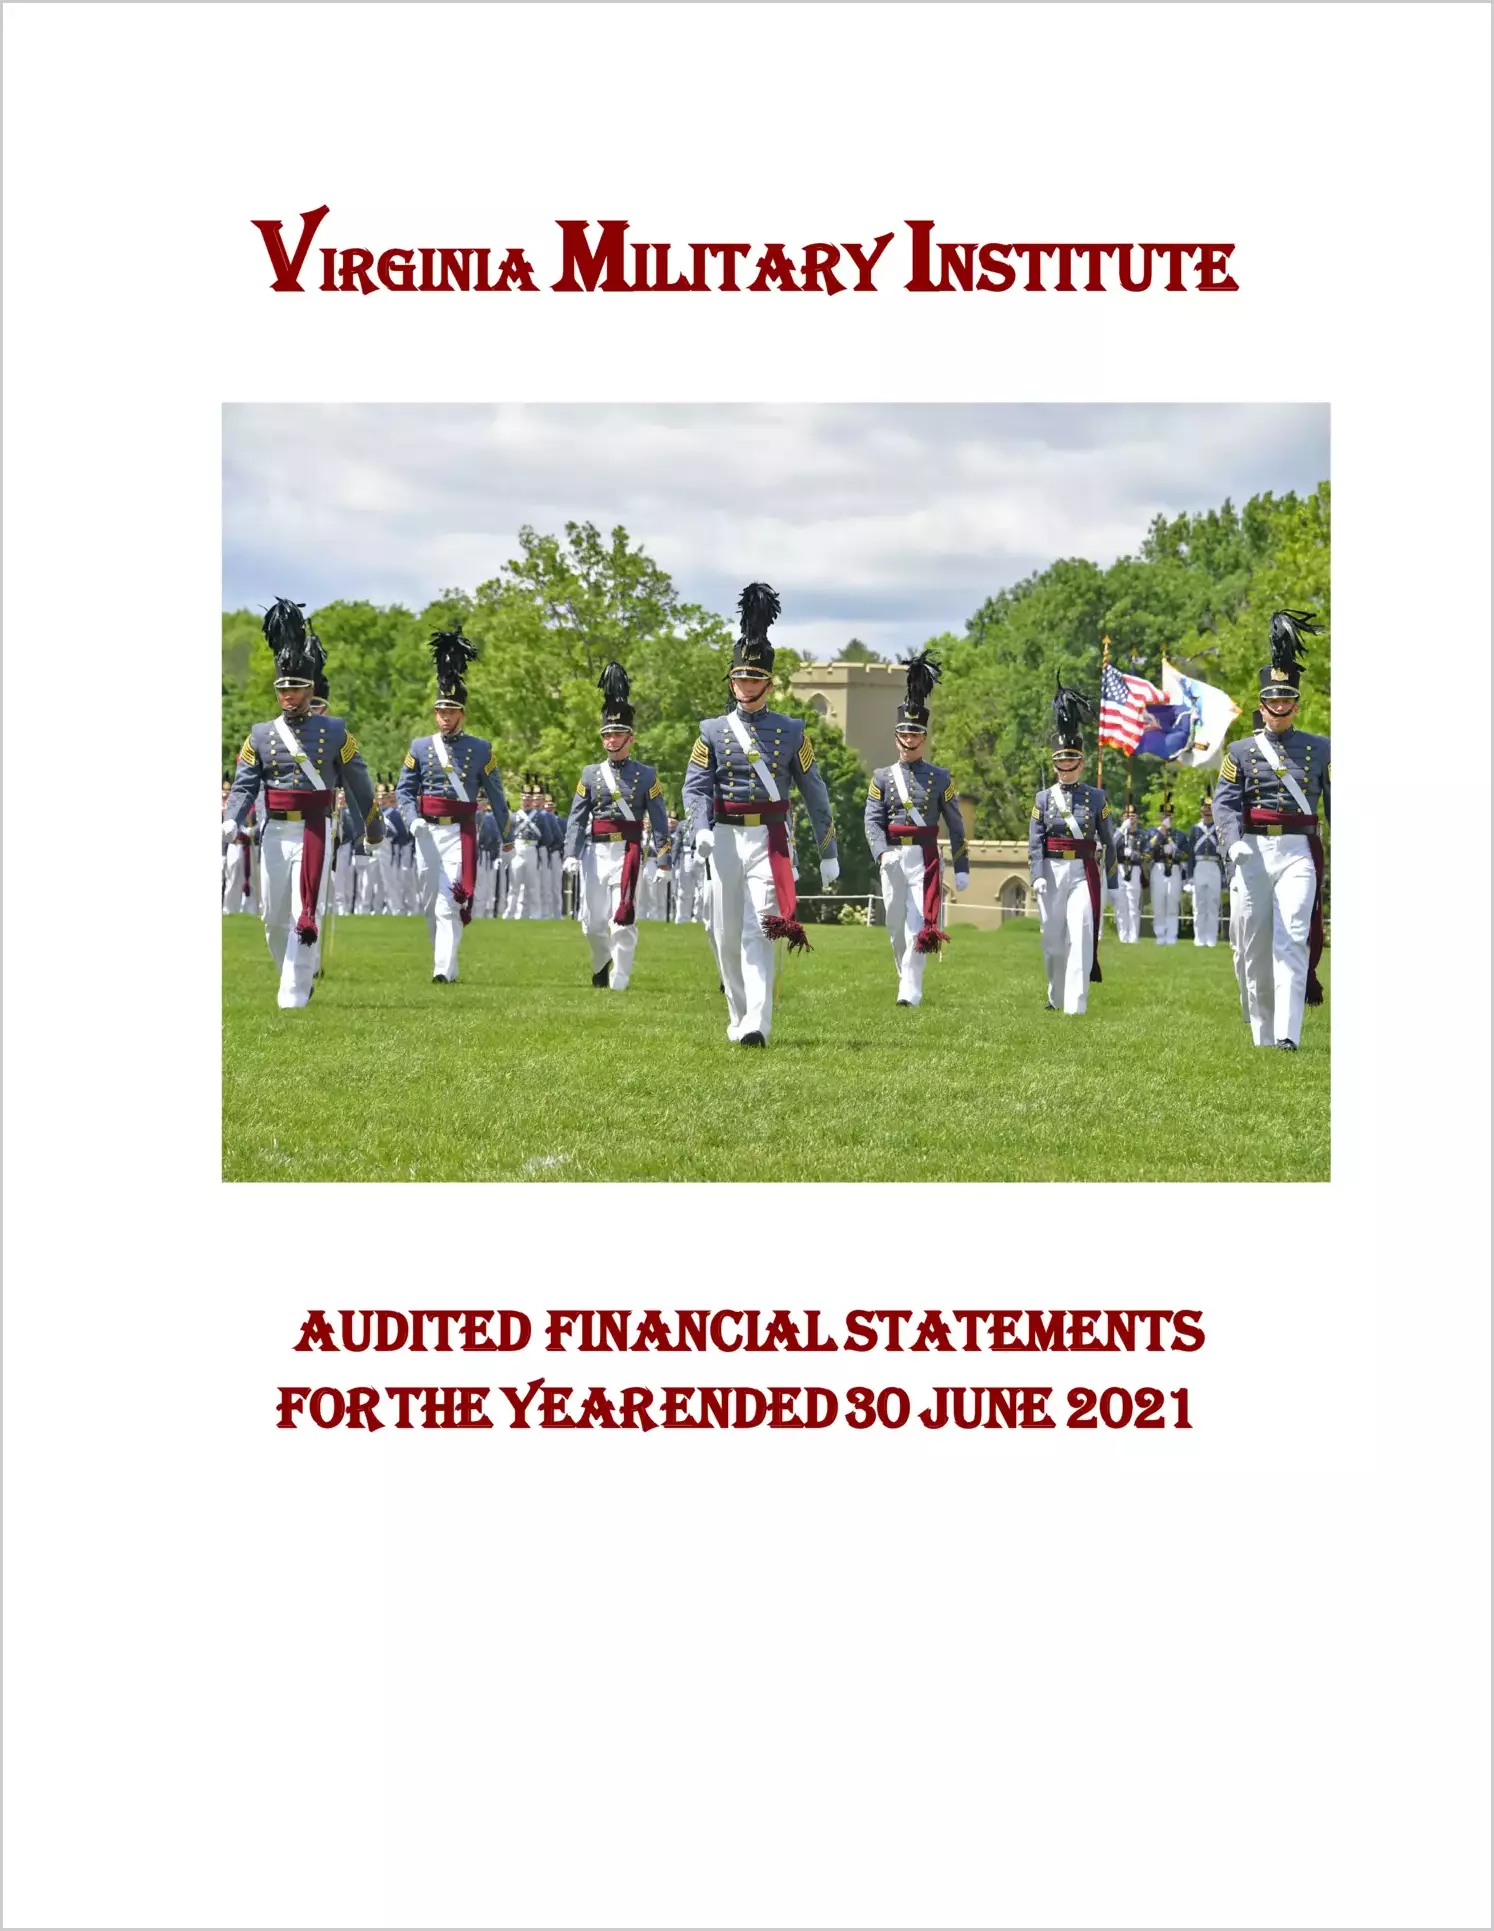 Virginia Military Institute Financial Statements for the year ended June 30, 2021